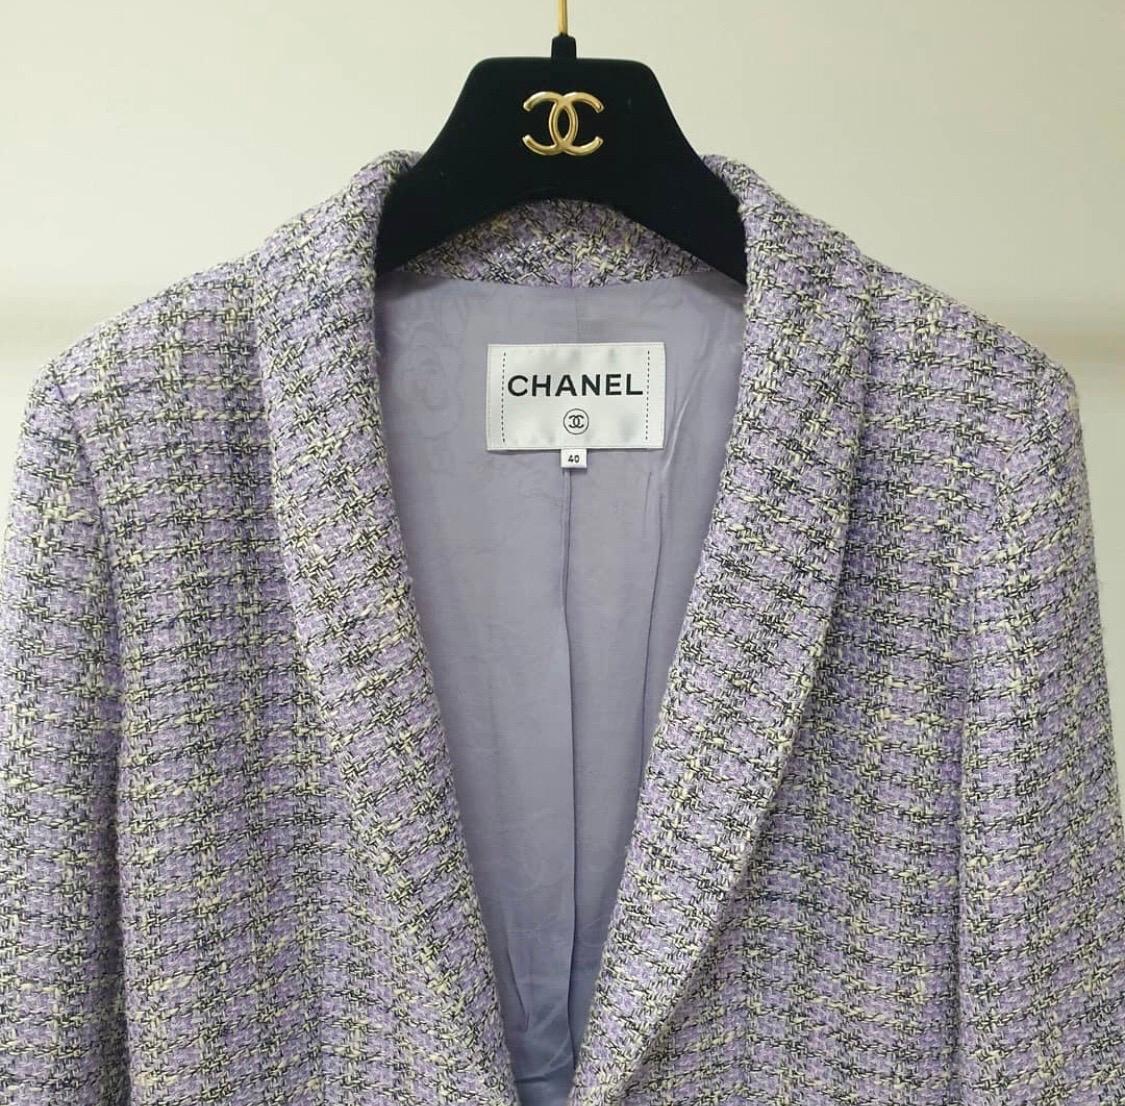 Chanel lavender long sleeve tweed jacket with dual front patch pockets and front hook closure.
Shawl-collar. 
This item is previously worn and in very good condition.
Shell: Cotton/Polyester/Nylon/Rayon
Lining: 100% Silk
 It is from the Airport